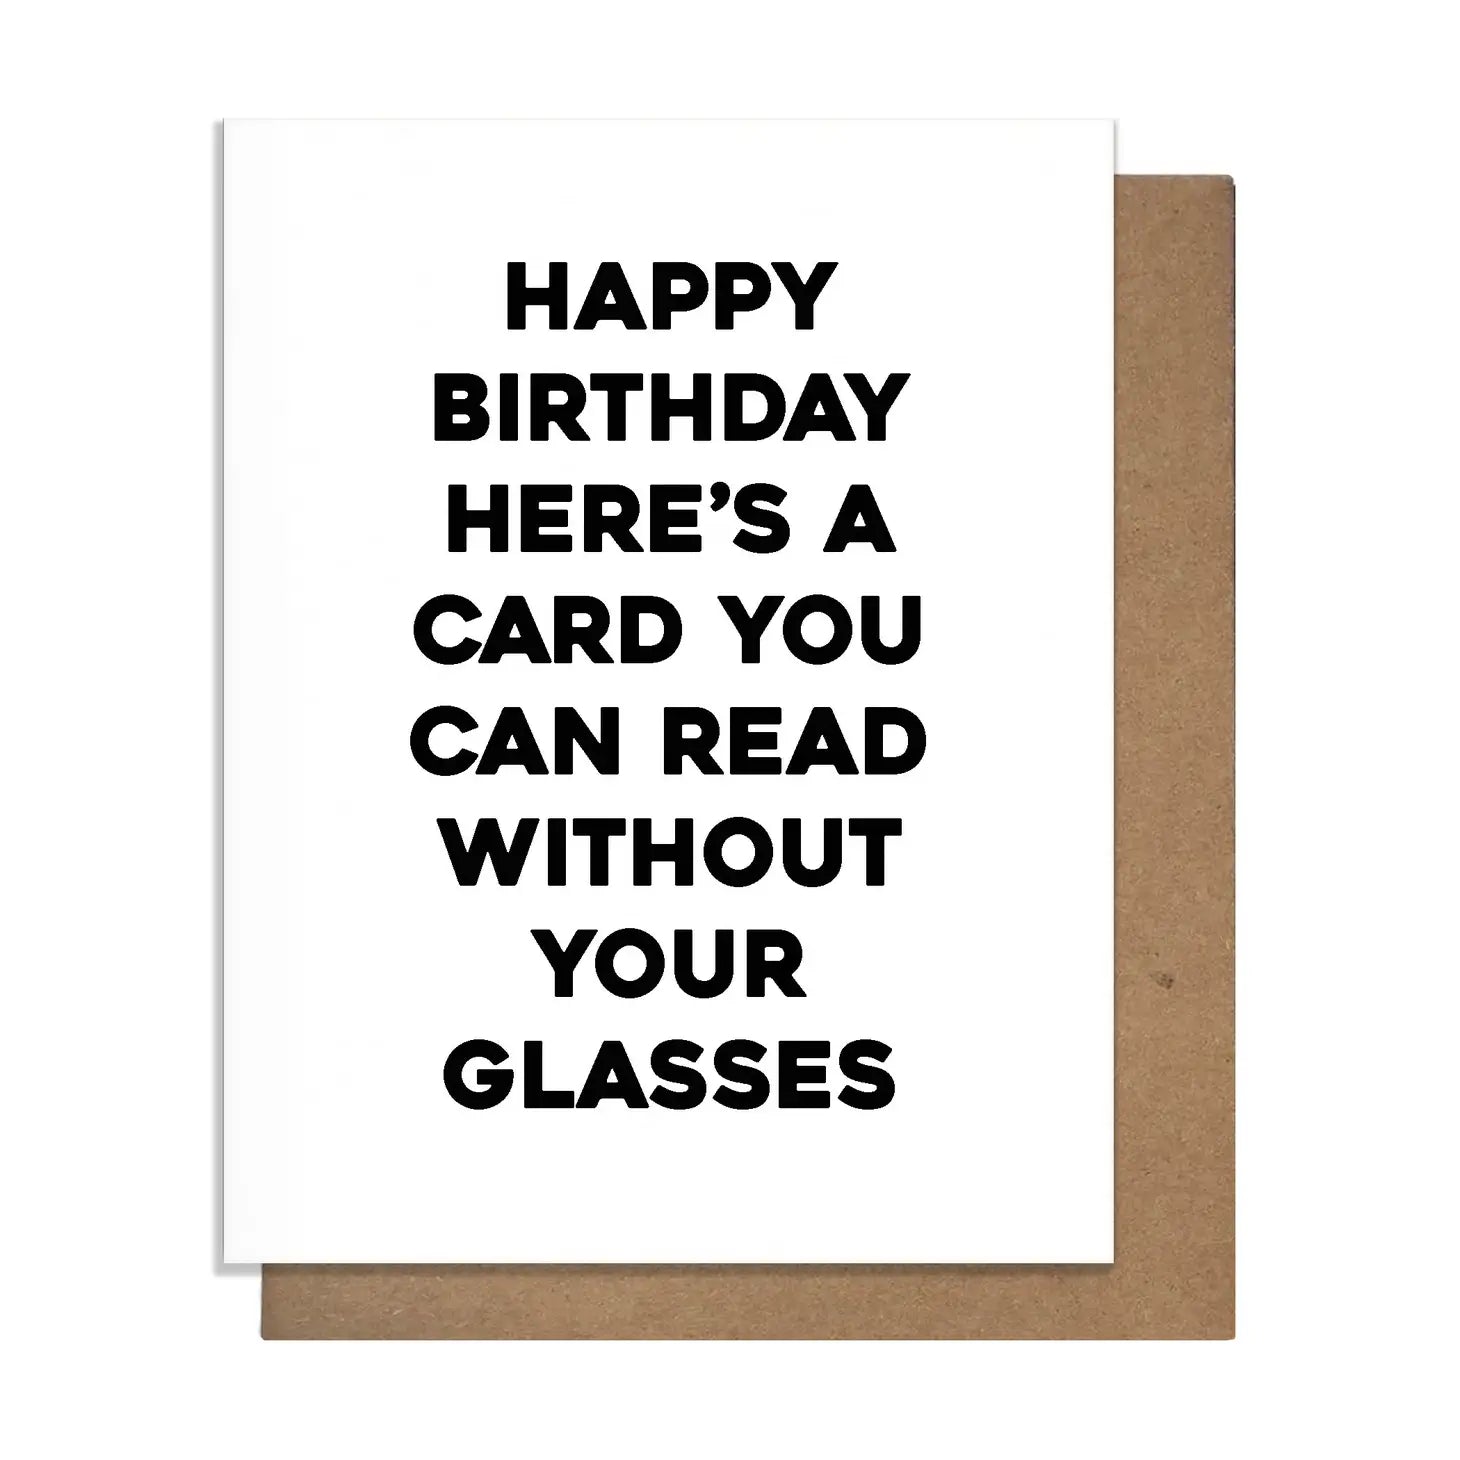 Card To Read Without Glasses Birthday Card